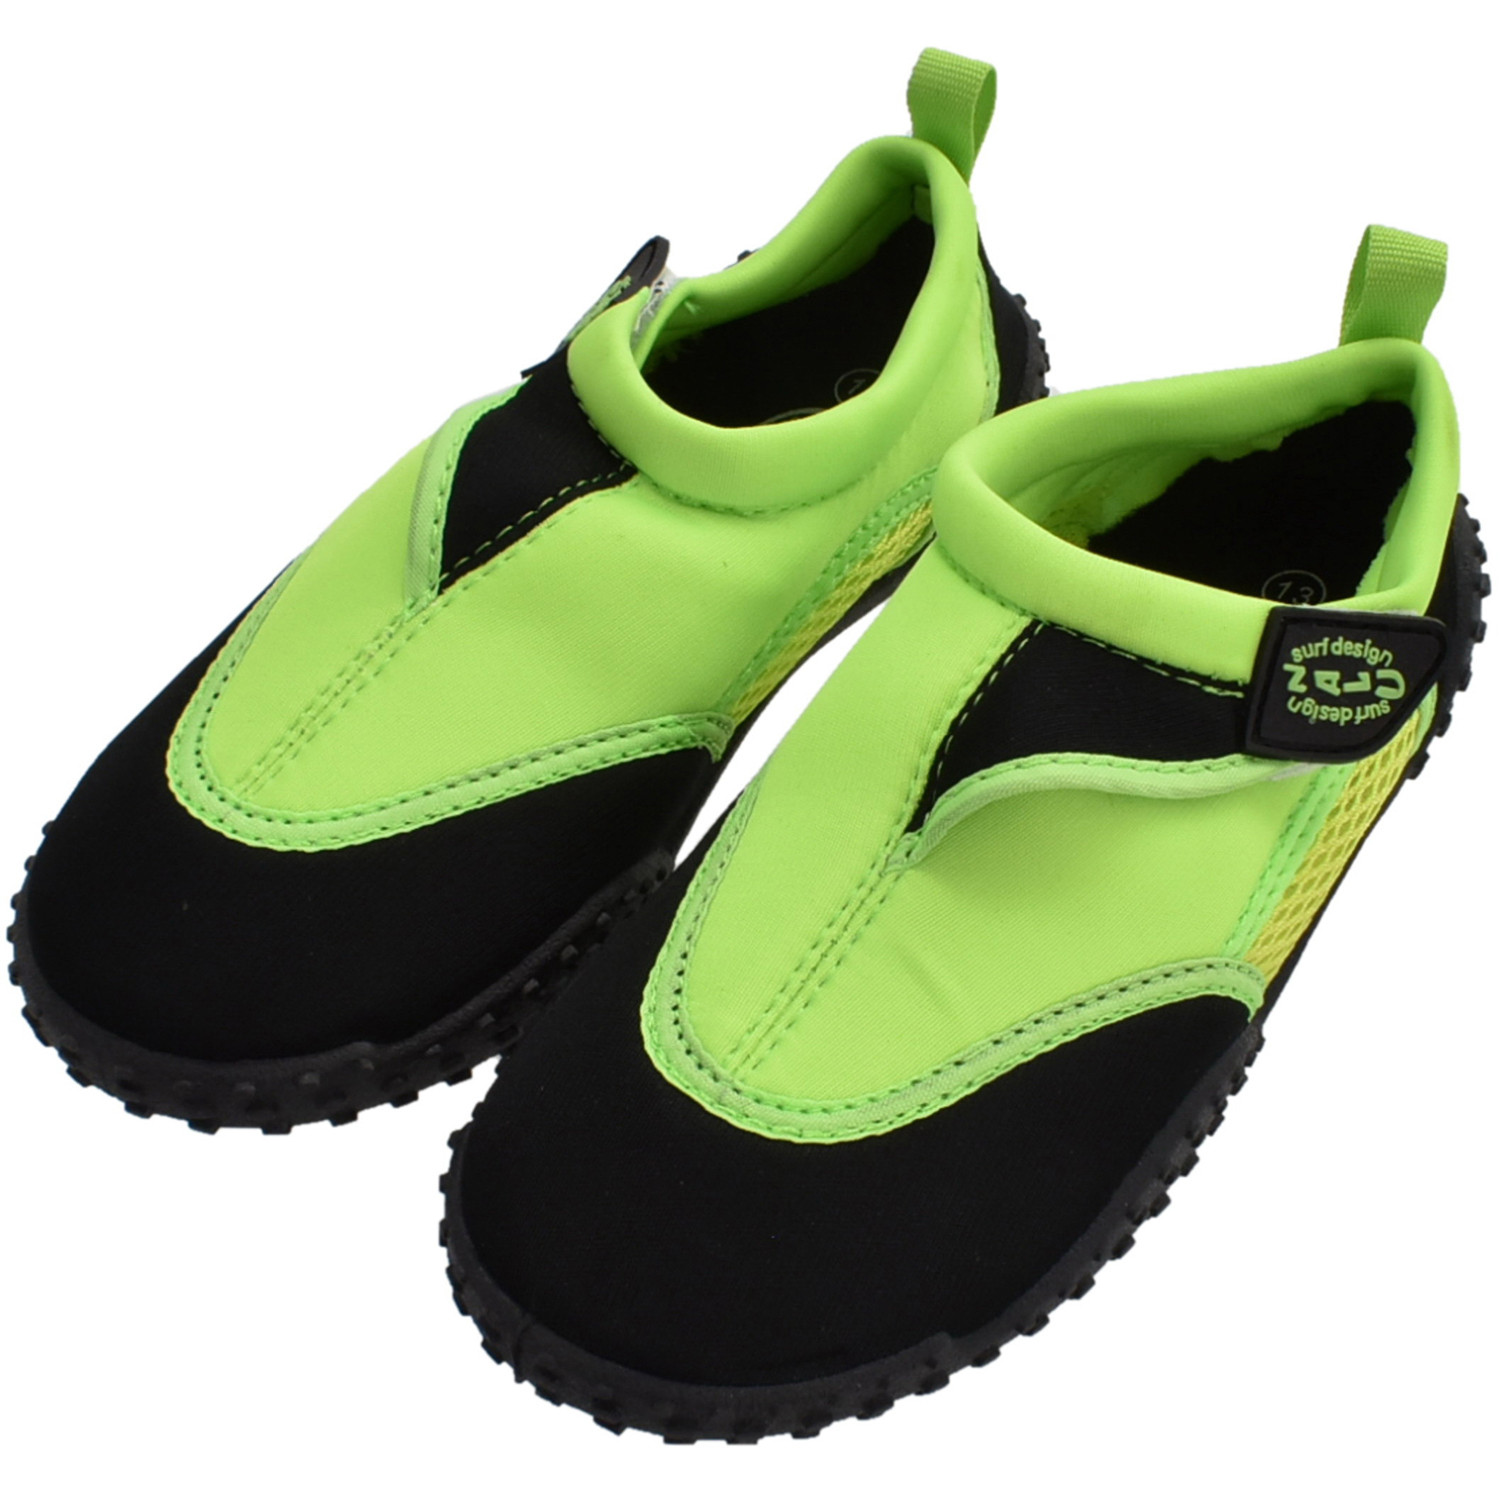 Single Everyday Summer Child's Aqua Shoe Size 8 in Assorted styles Image 1